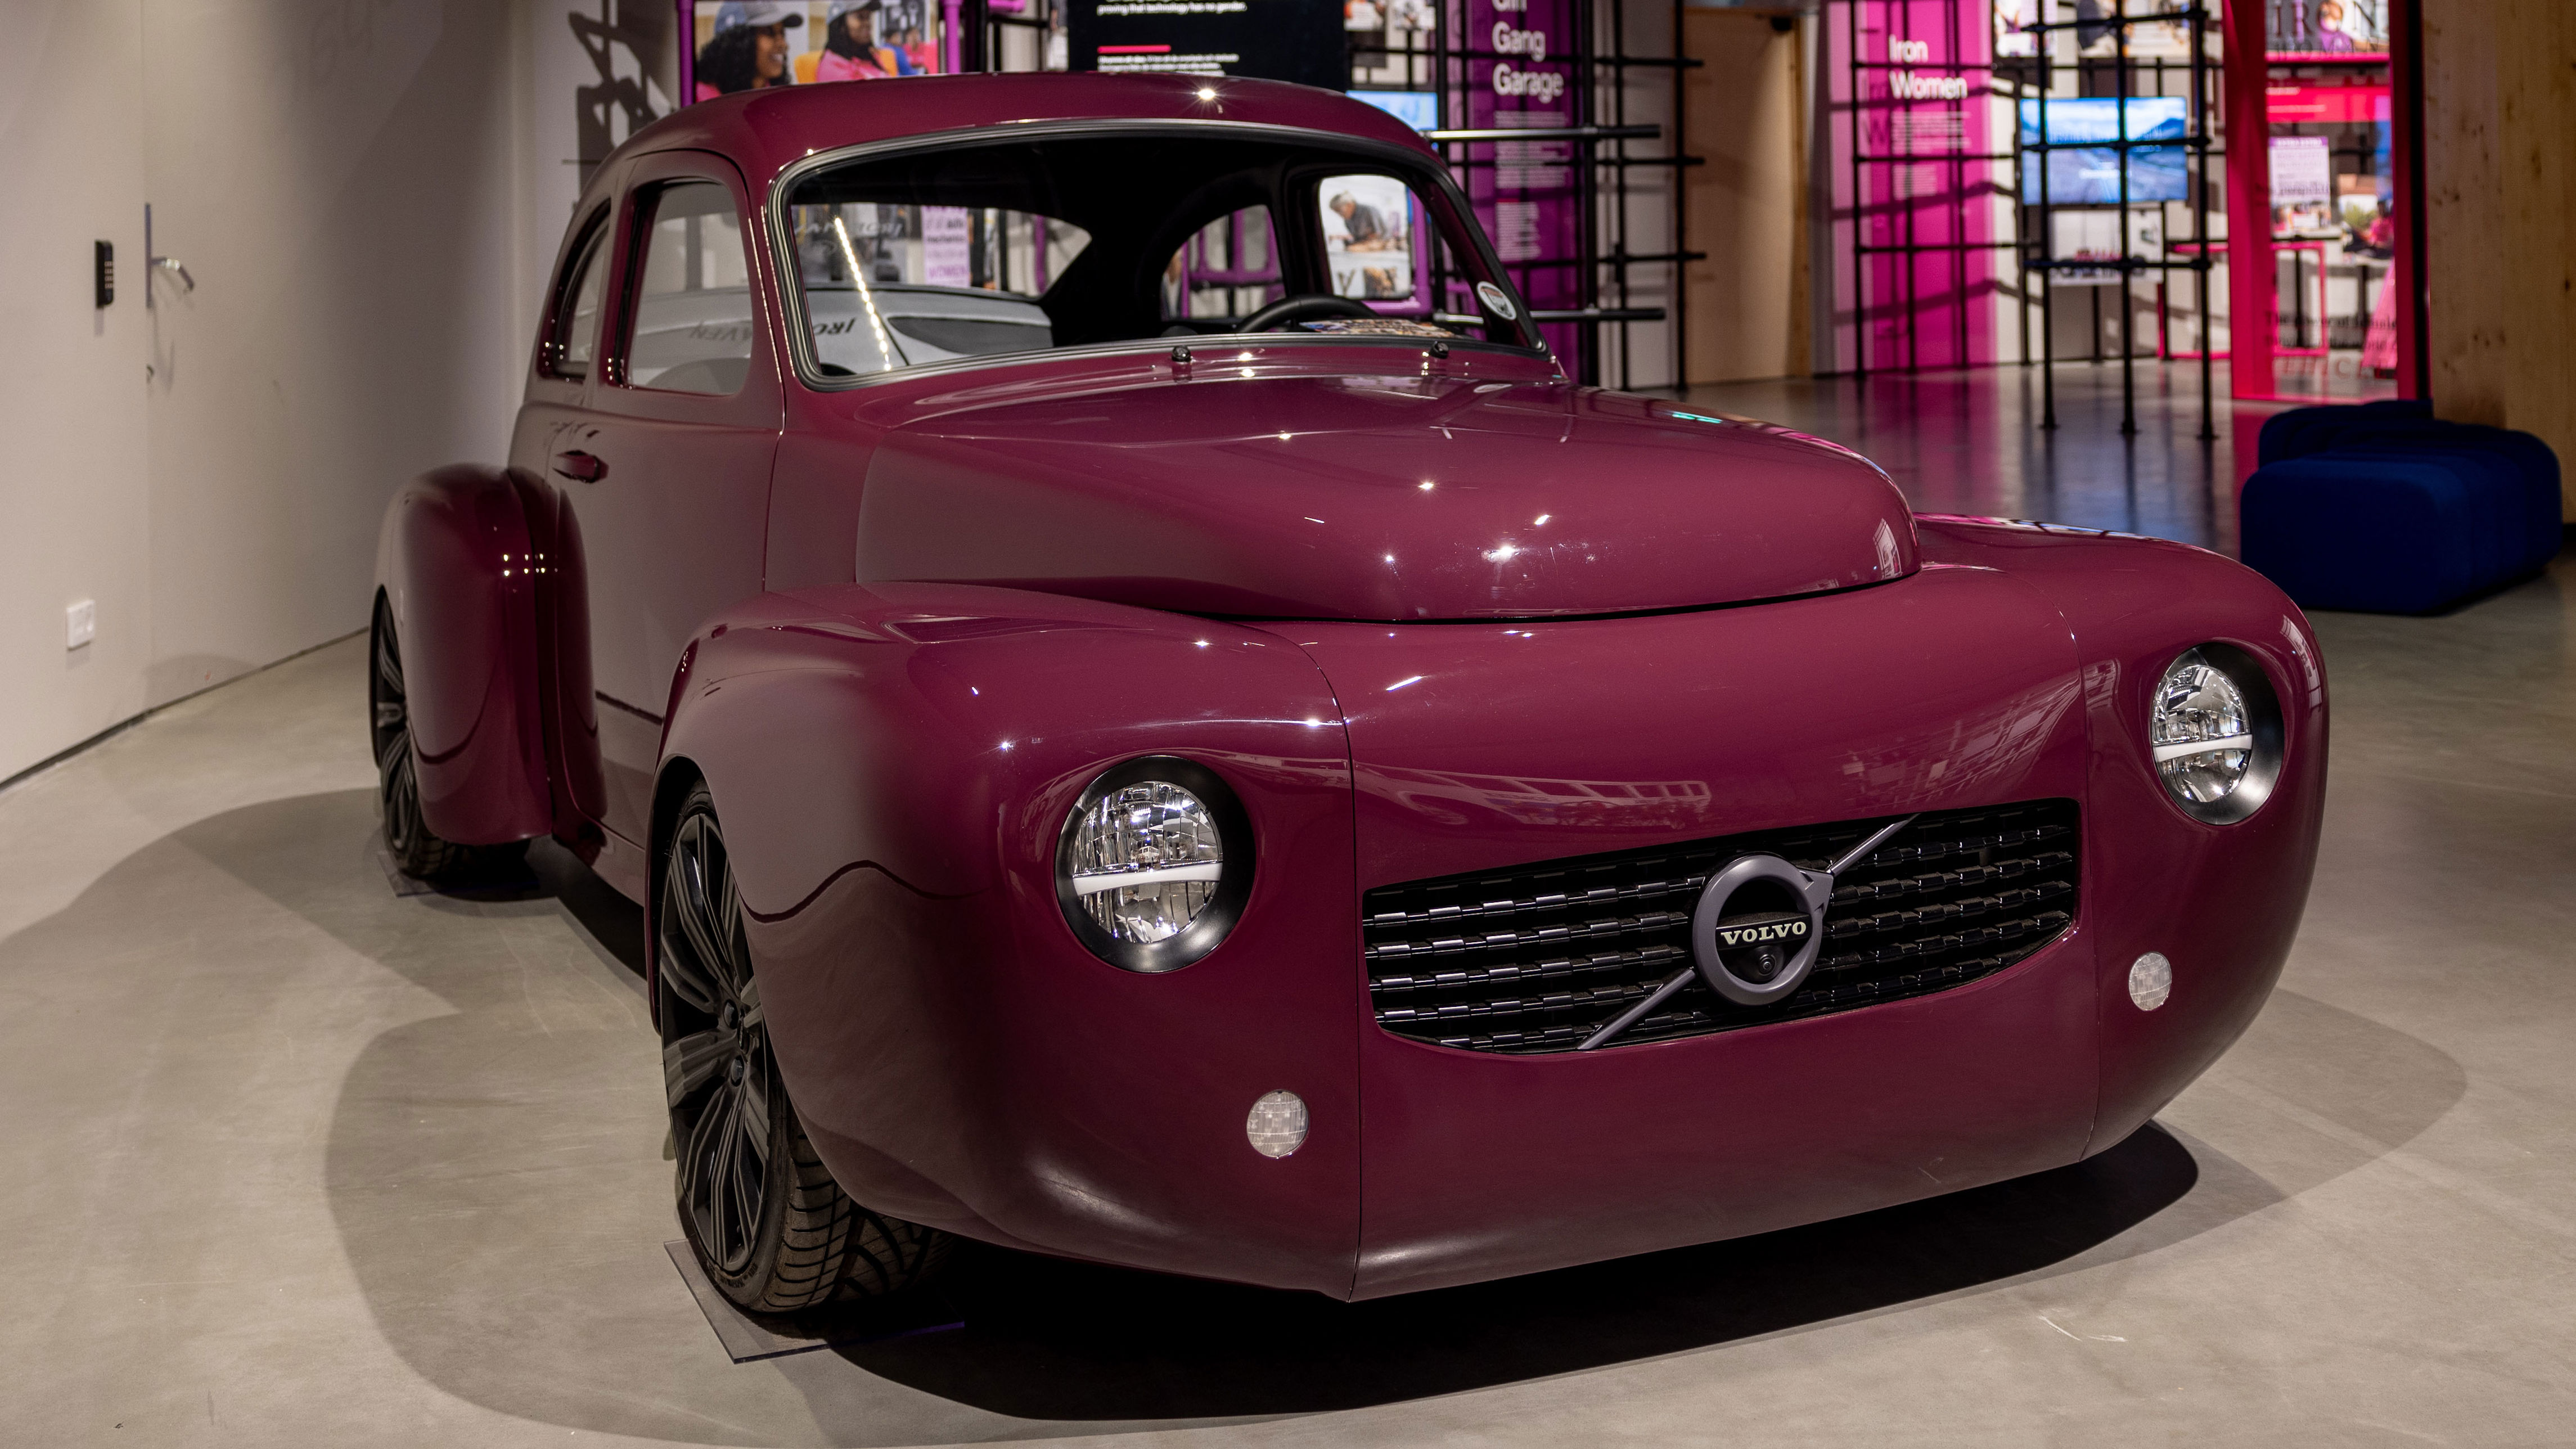 the iron maven is an all-electric volvo pv544 restomod with a villainous silhouette